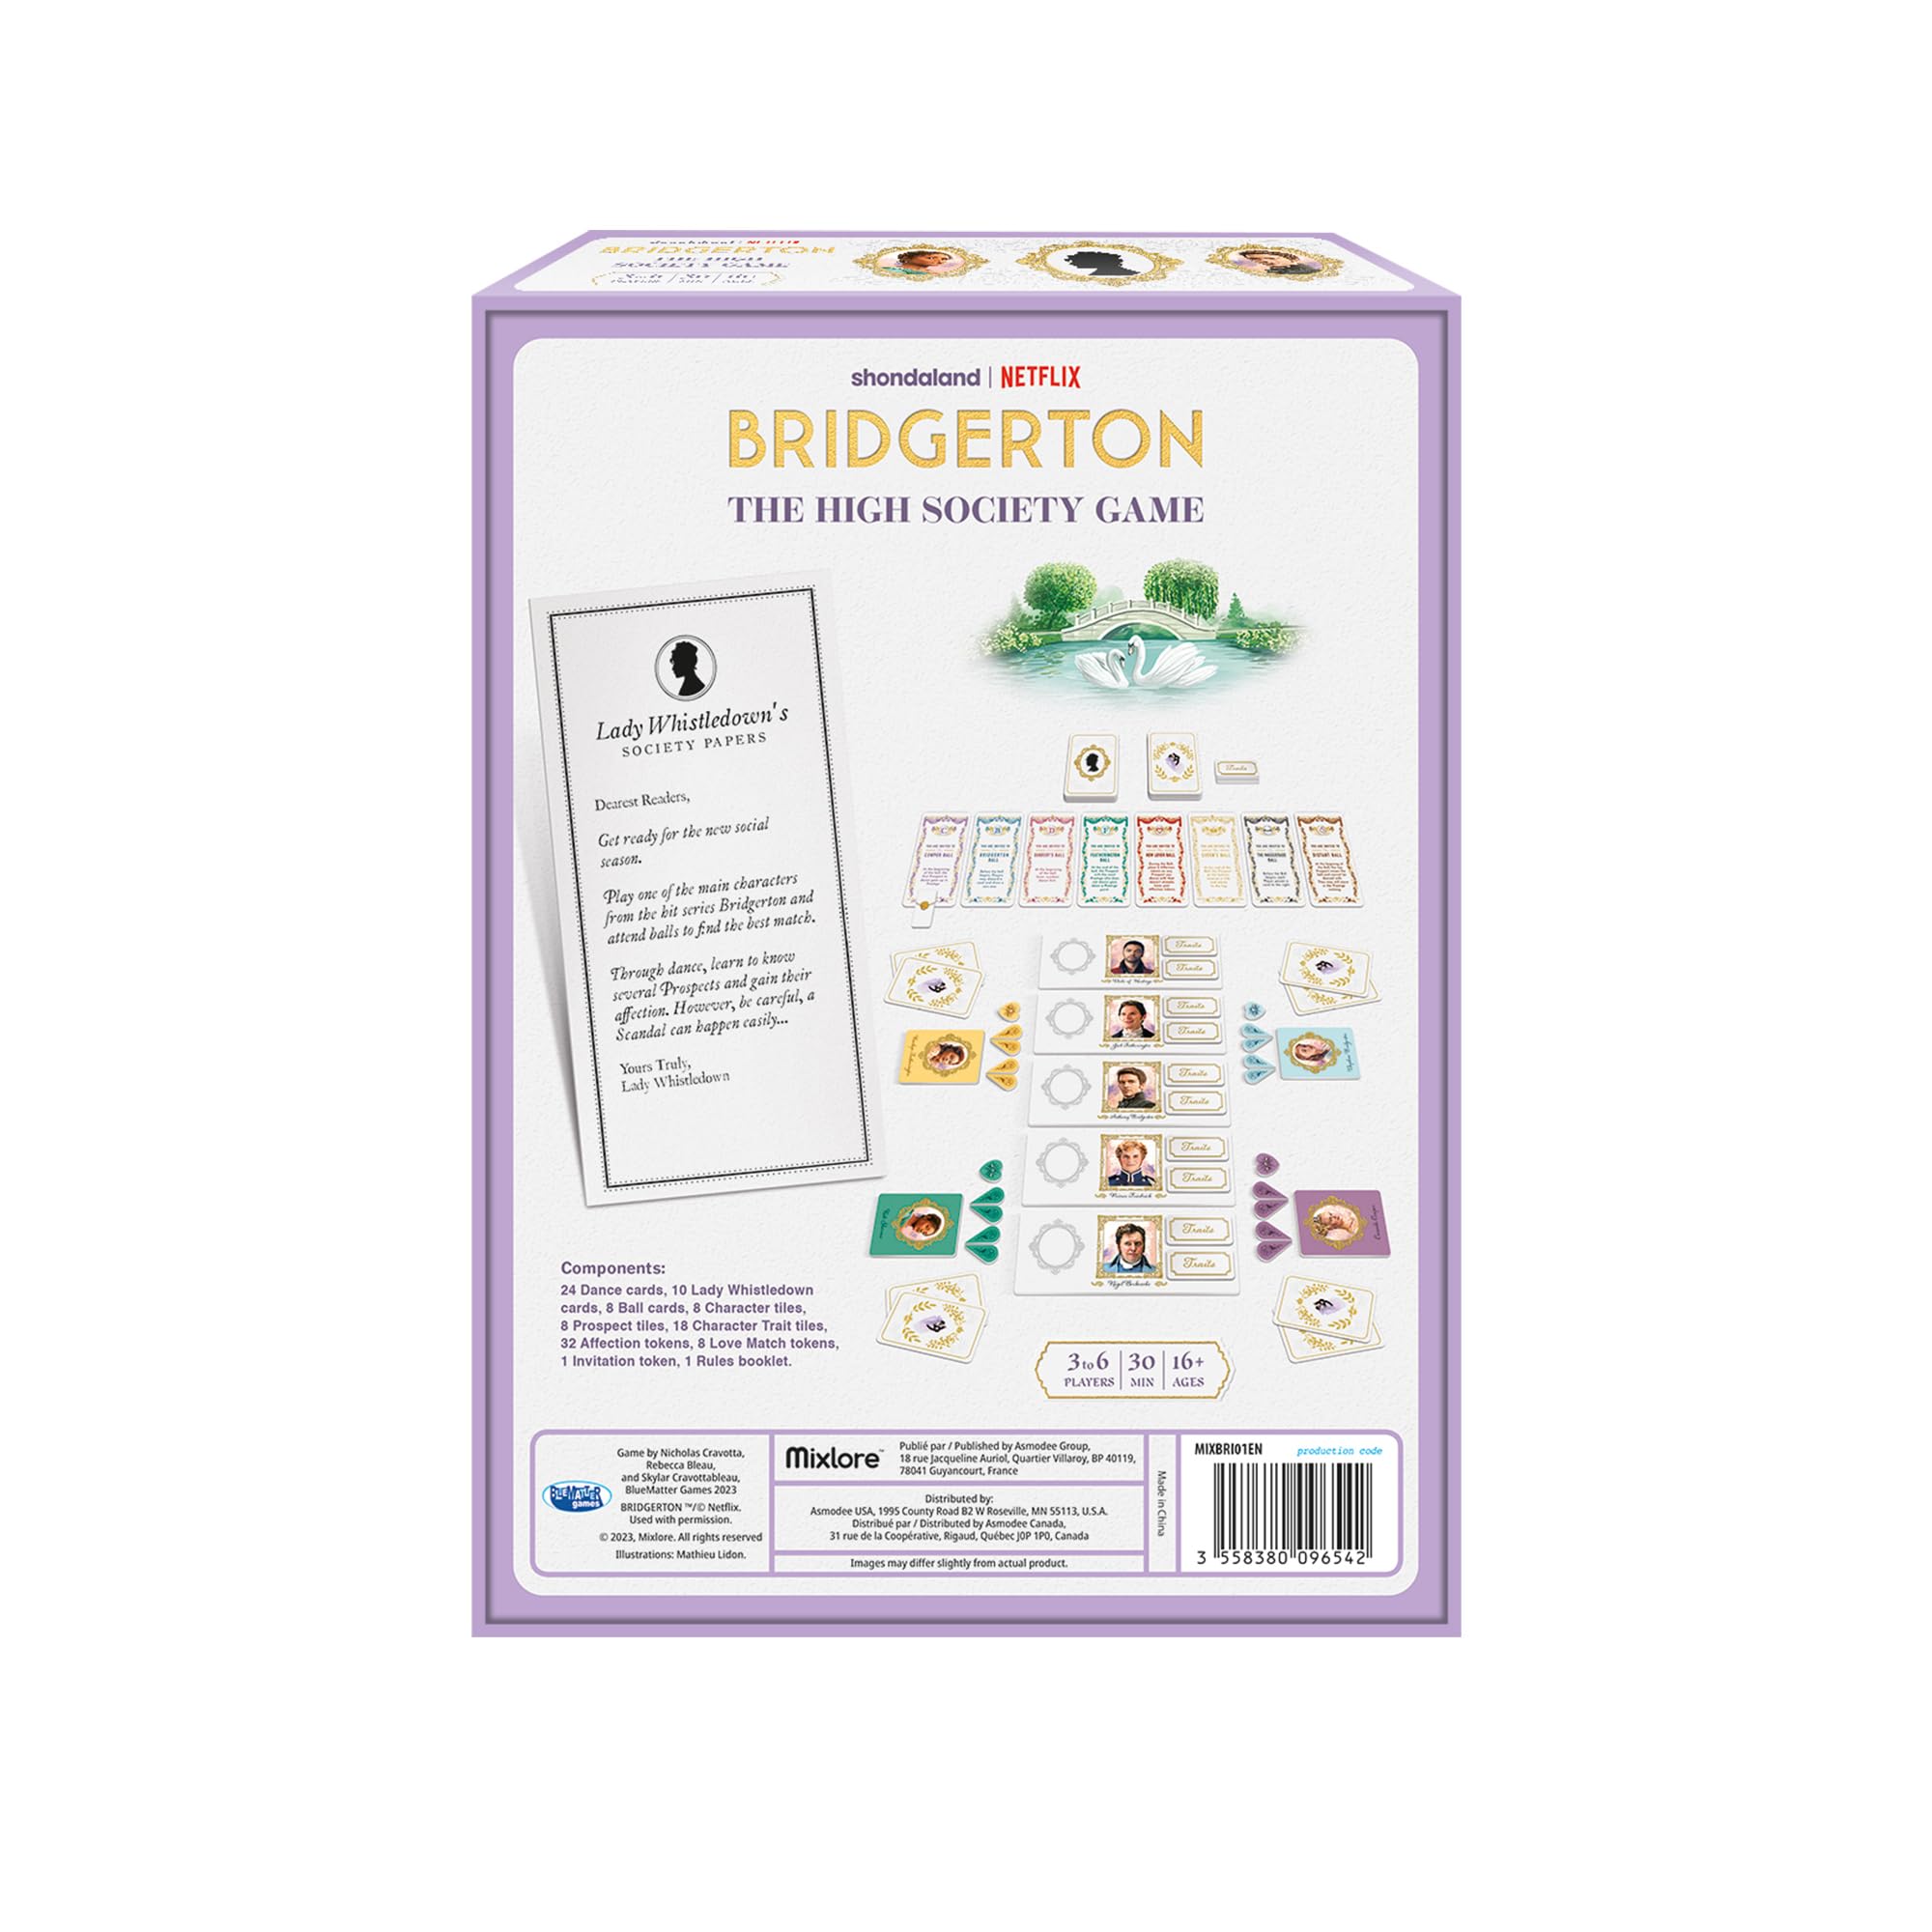 Bridgerton The High Society Board Game - Strategy Game Based on The Hit Netflix TV Series, Fun Game for Adult Game Night, Ages 16+, 3-6 Players, 30 Minute Playtime, Made by Mixlore